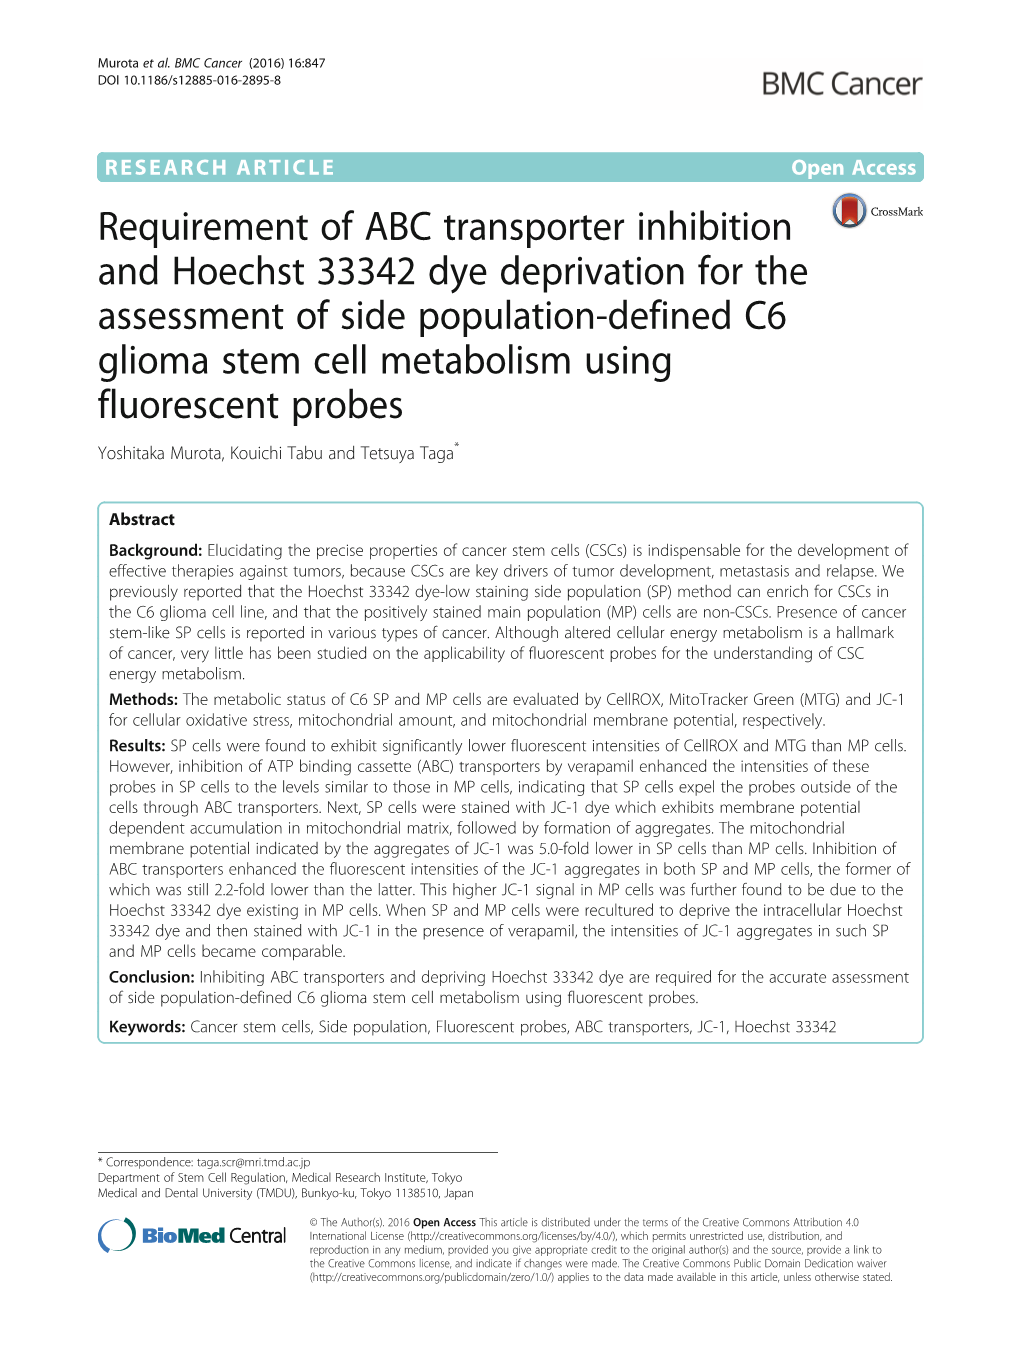 Requirement of ABC Transporter Inhibition and Hoechst 33342 Dye